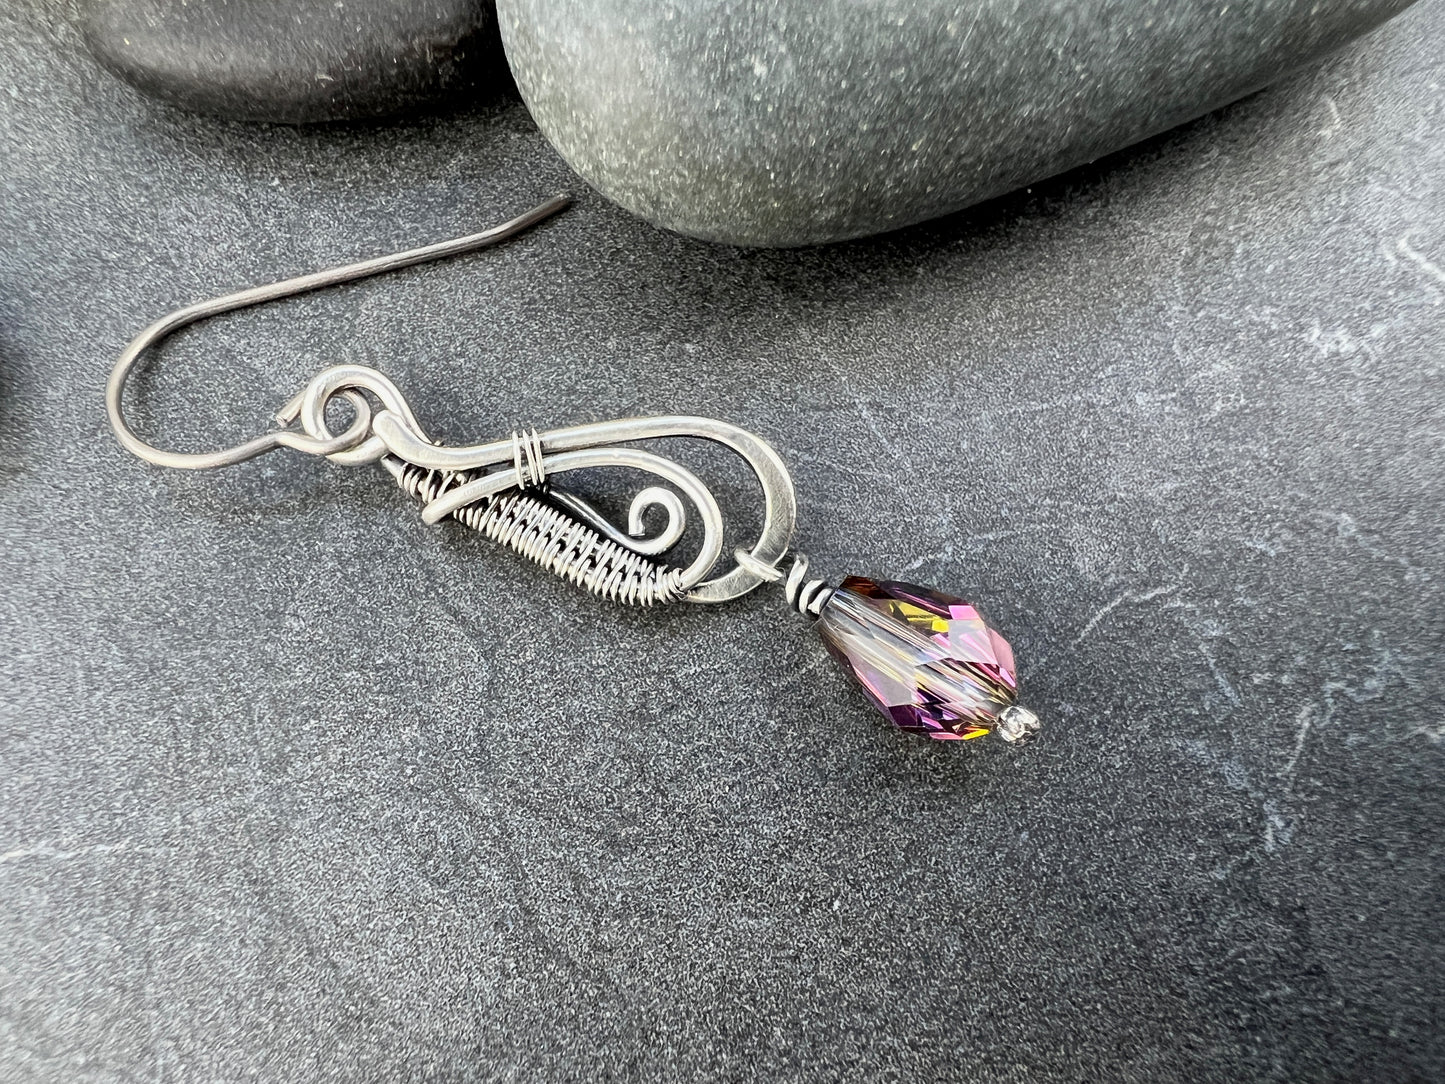 Handcrafted Sterling Silver Tear Drop Earrings with Watermelon Crystal | Intricate Wire Woven Design